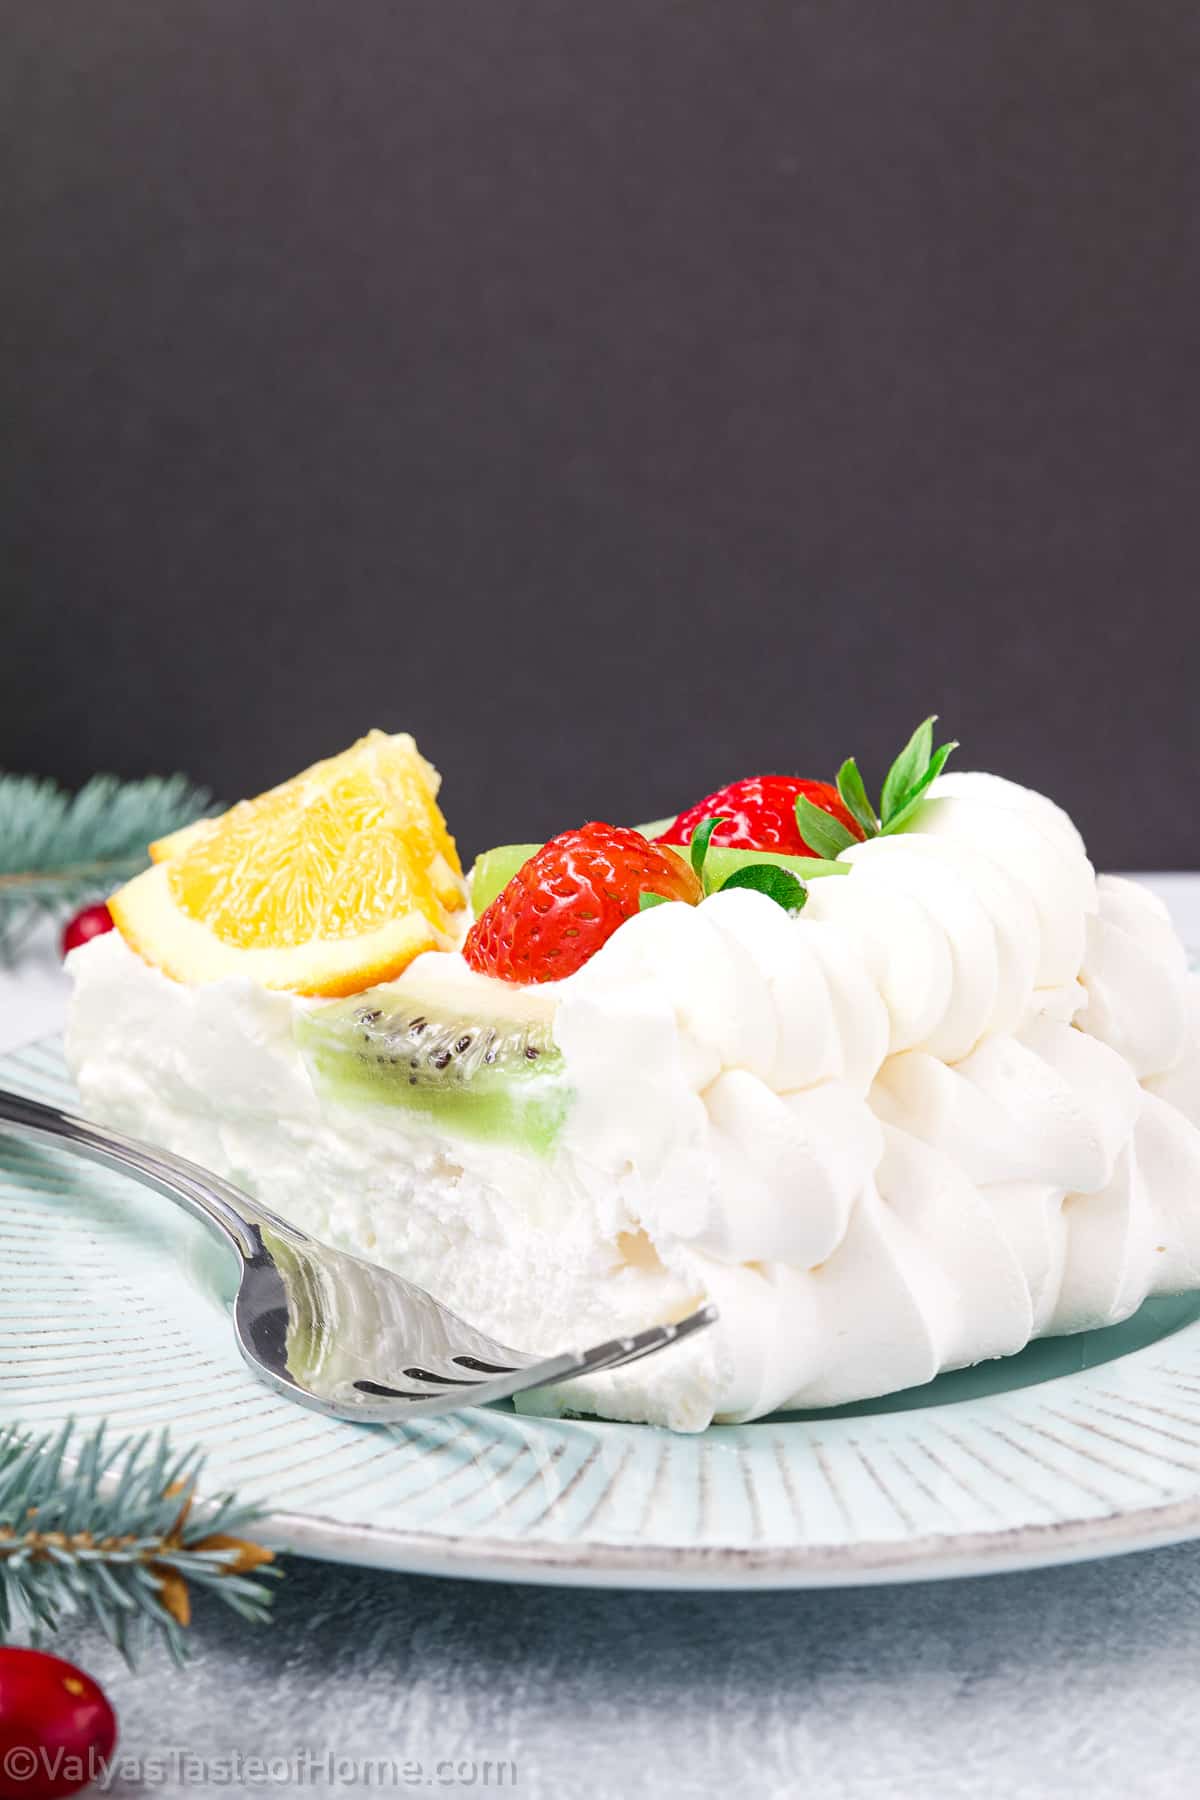 The whipped cream topping adds a creamy richness that compliments the sweet meringue